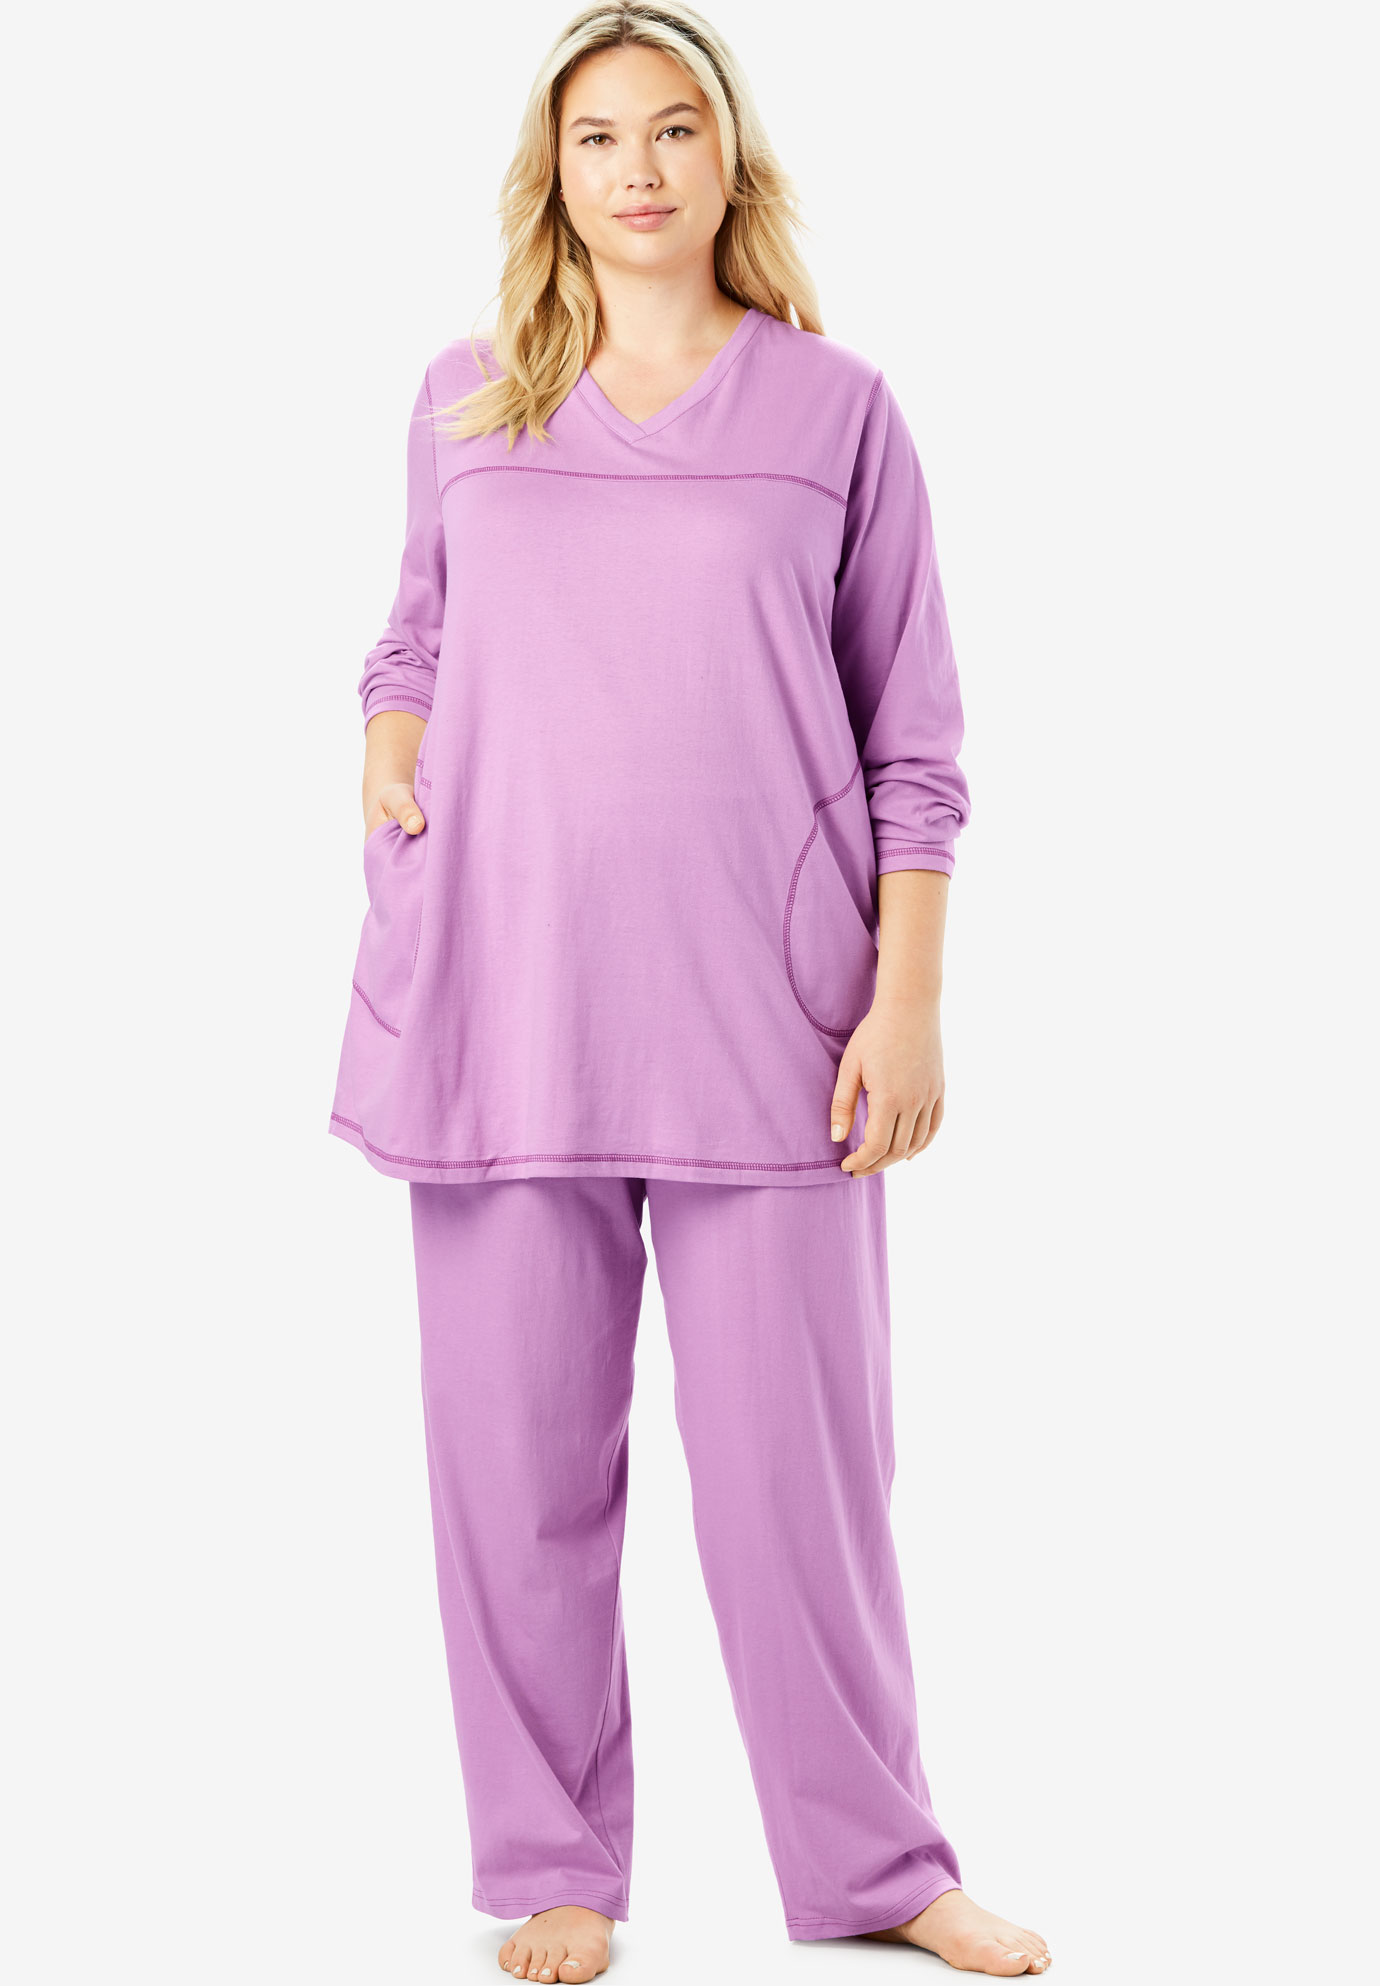 Topstitched PJ Set by Dreams & Co.®| Plus Size Pajama Sets | Woman Within